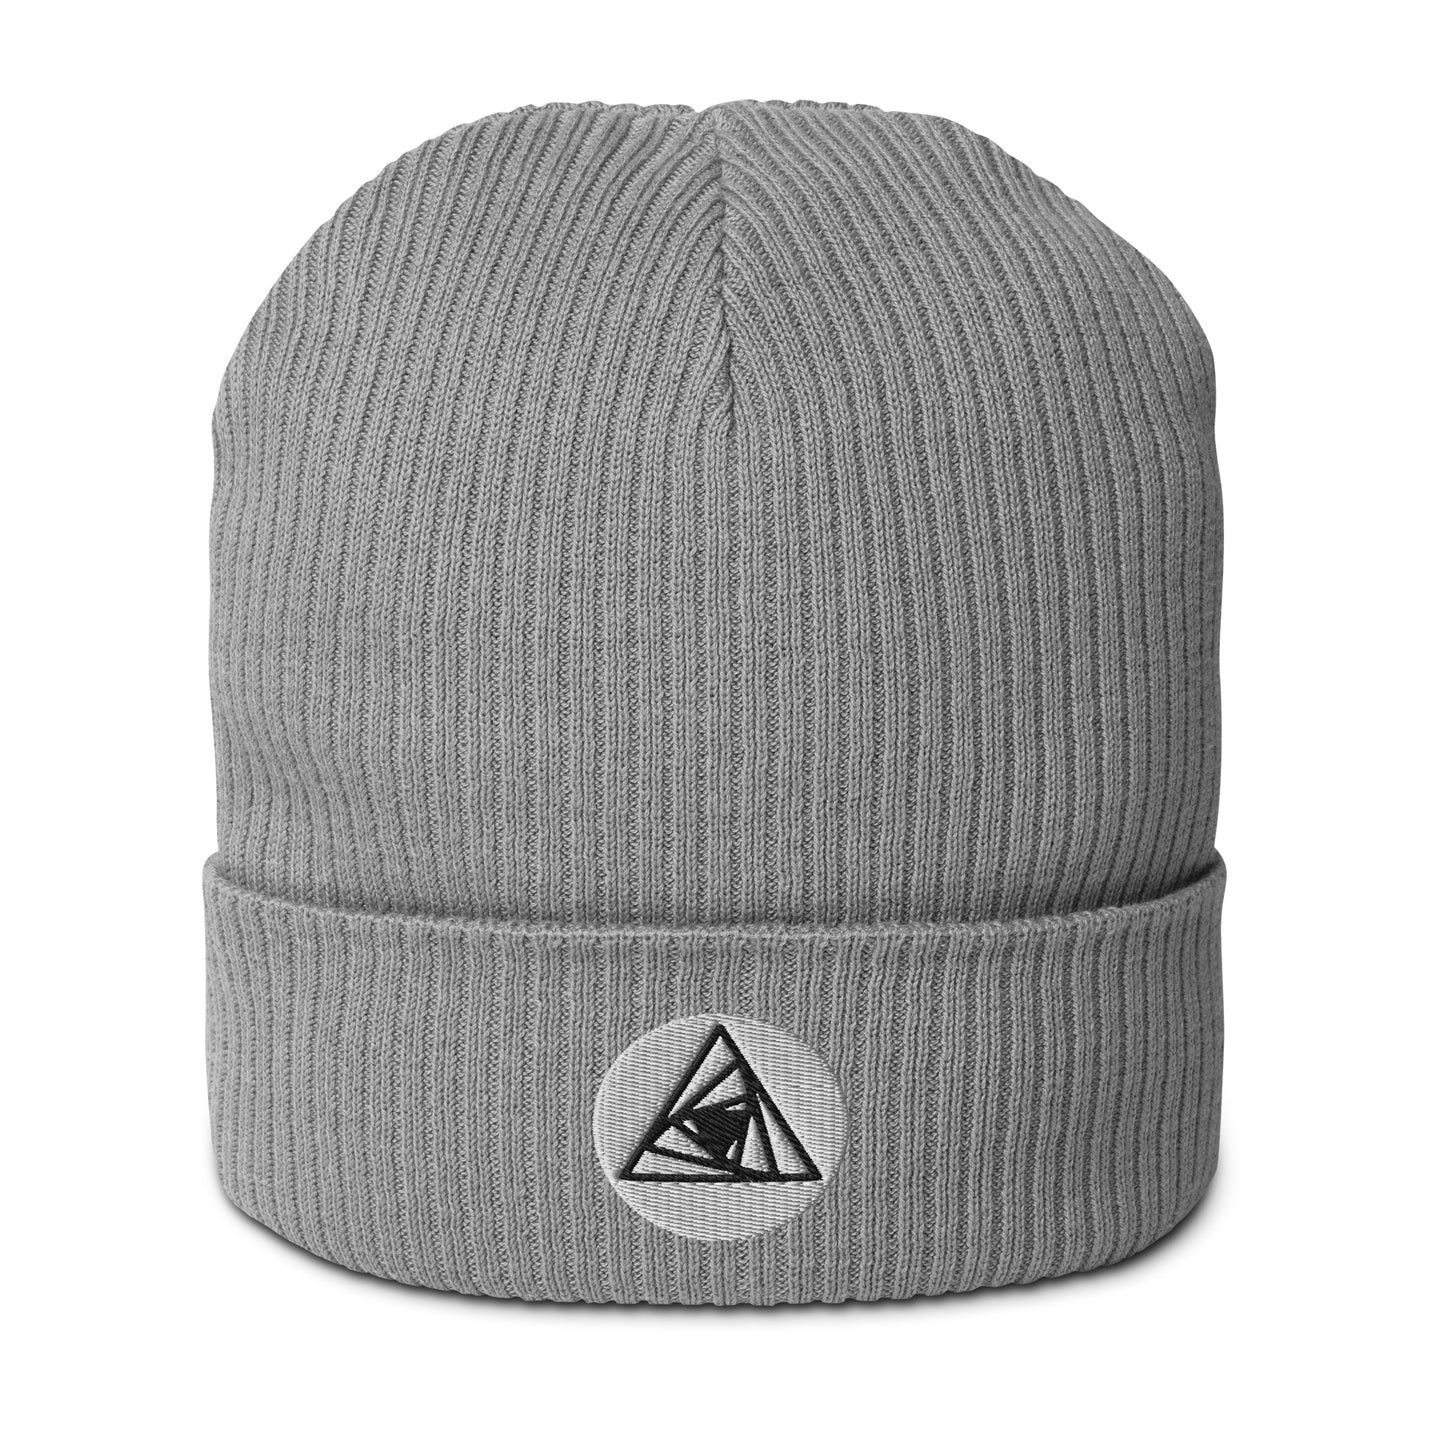 Behold, our Spiraling Equilateral Triangles Beanie in Cloudy Gray  —a garment of cosmic significance. Crafted from organic cotton and adorned with a mesmerizing Spiraling Equilateral Triangles embroidery, it's not your run-of-the-mill hat. 